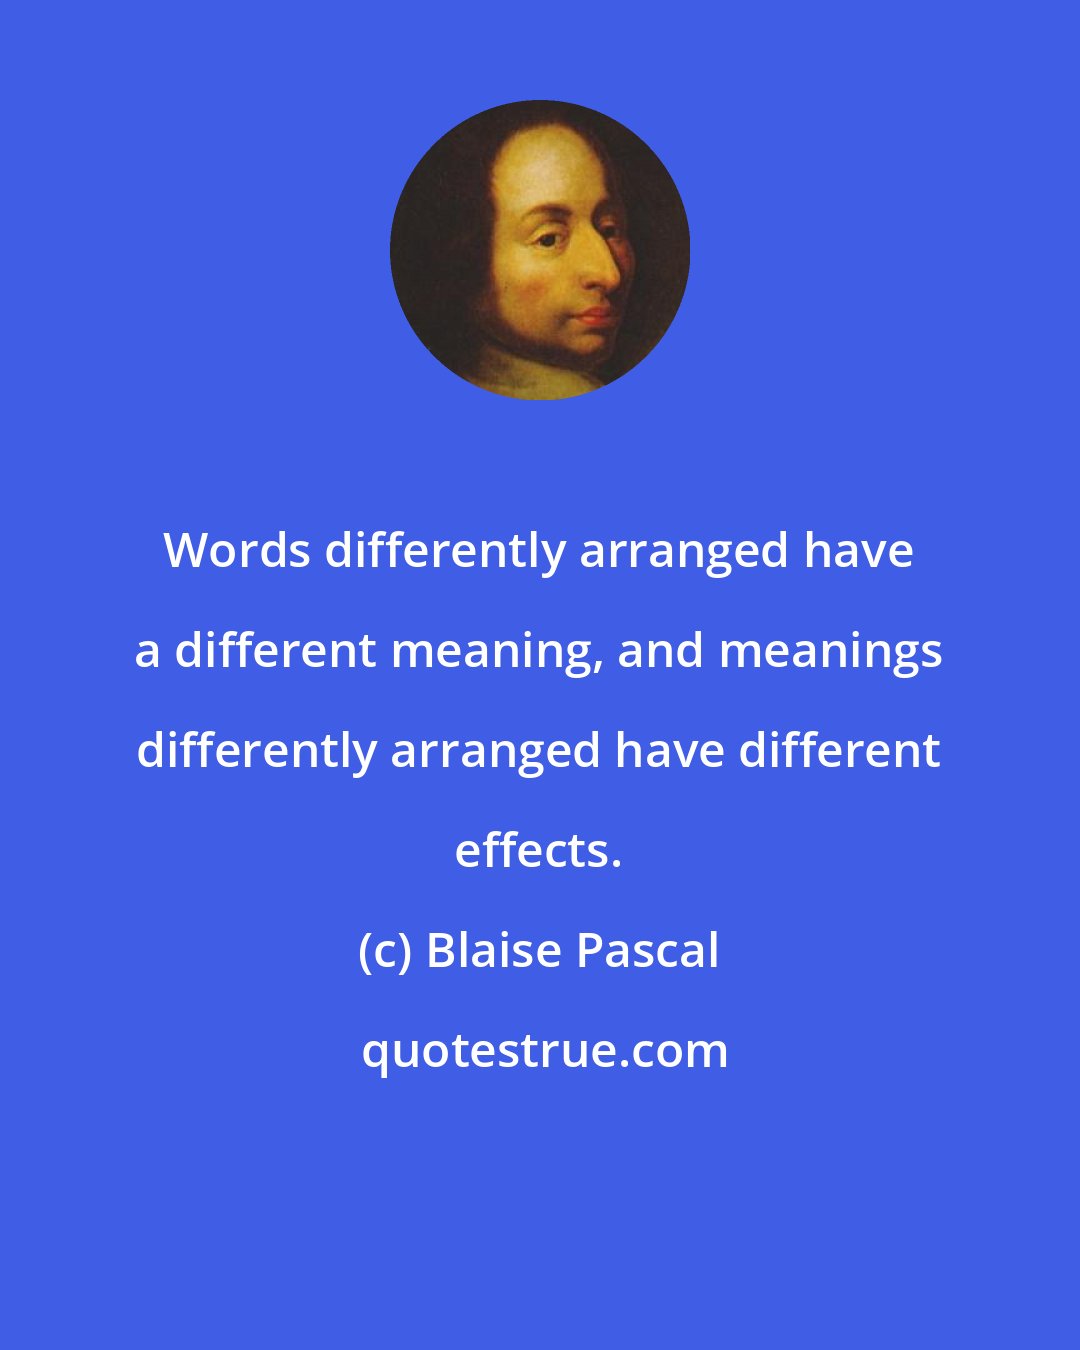 Blaise Pascal: Words differently arranged have a different meaning, and meanings differently arranged have different effects.